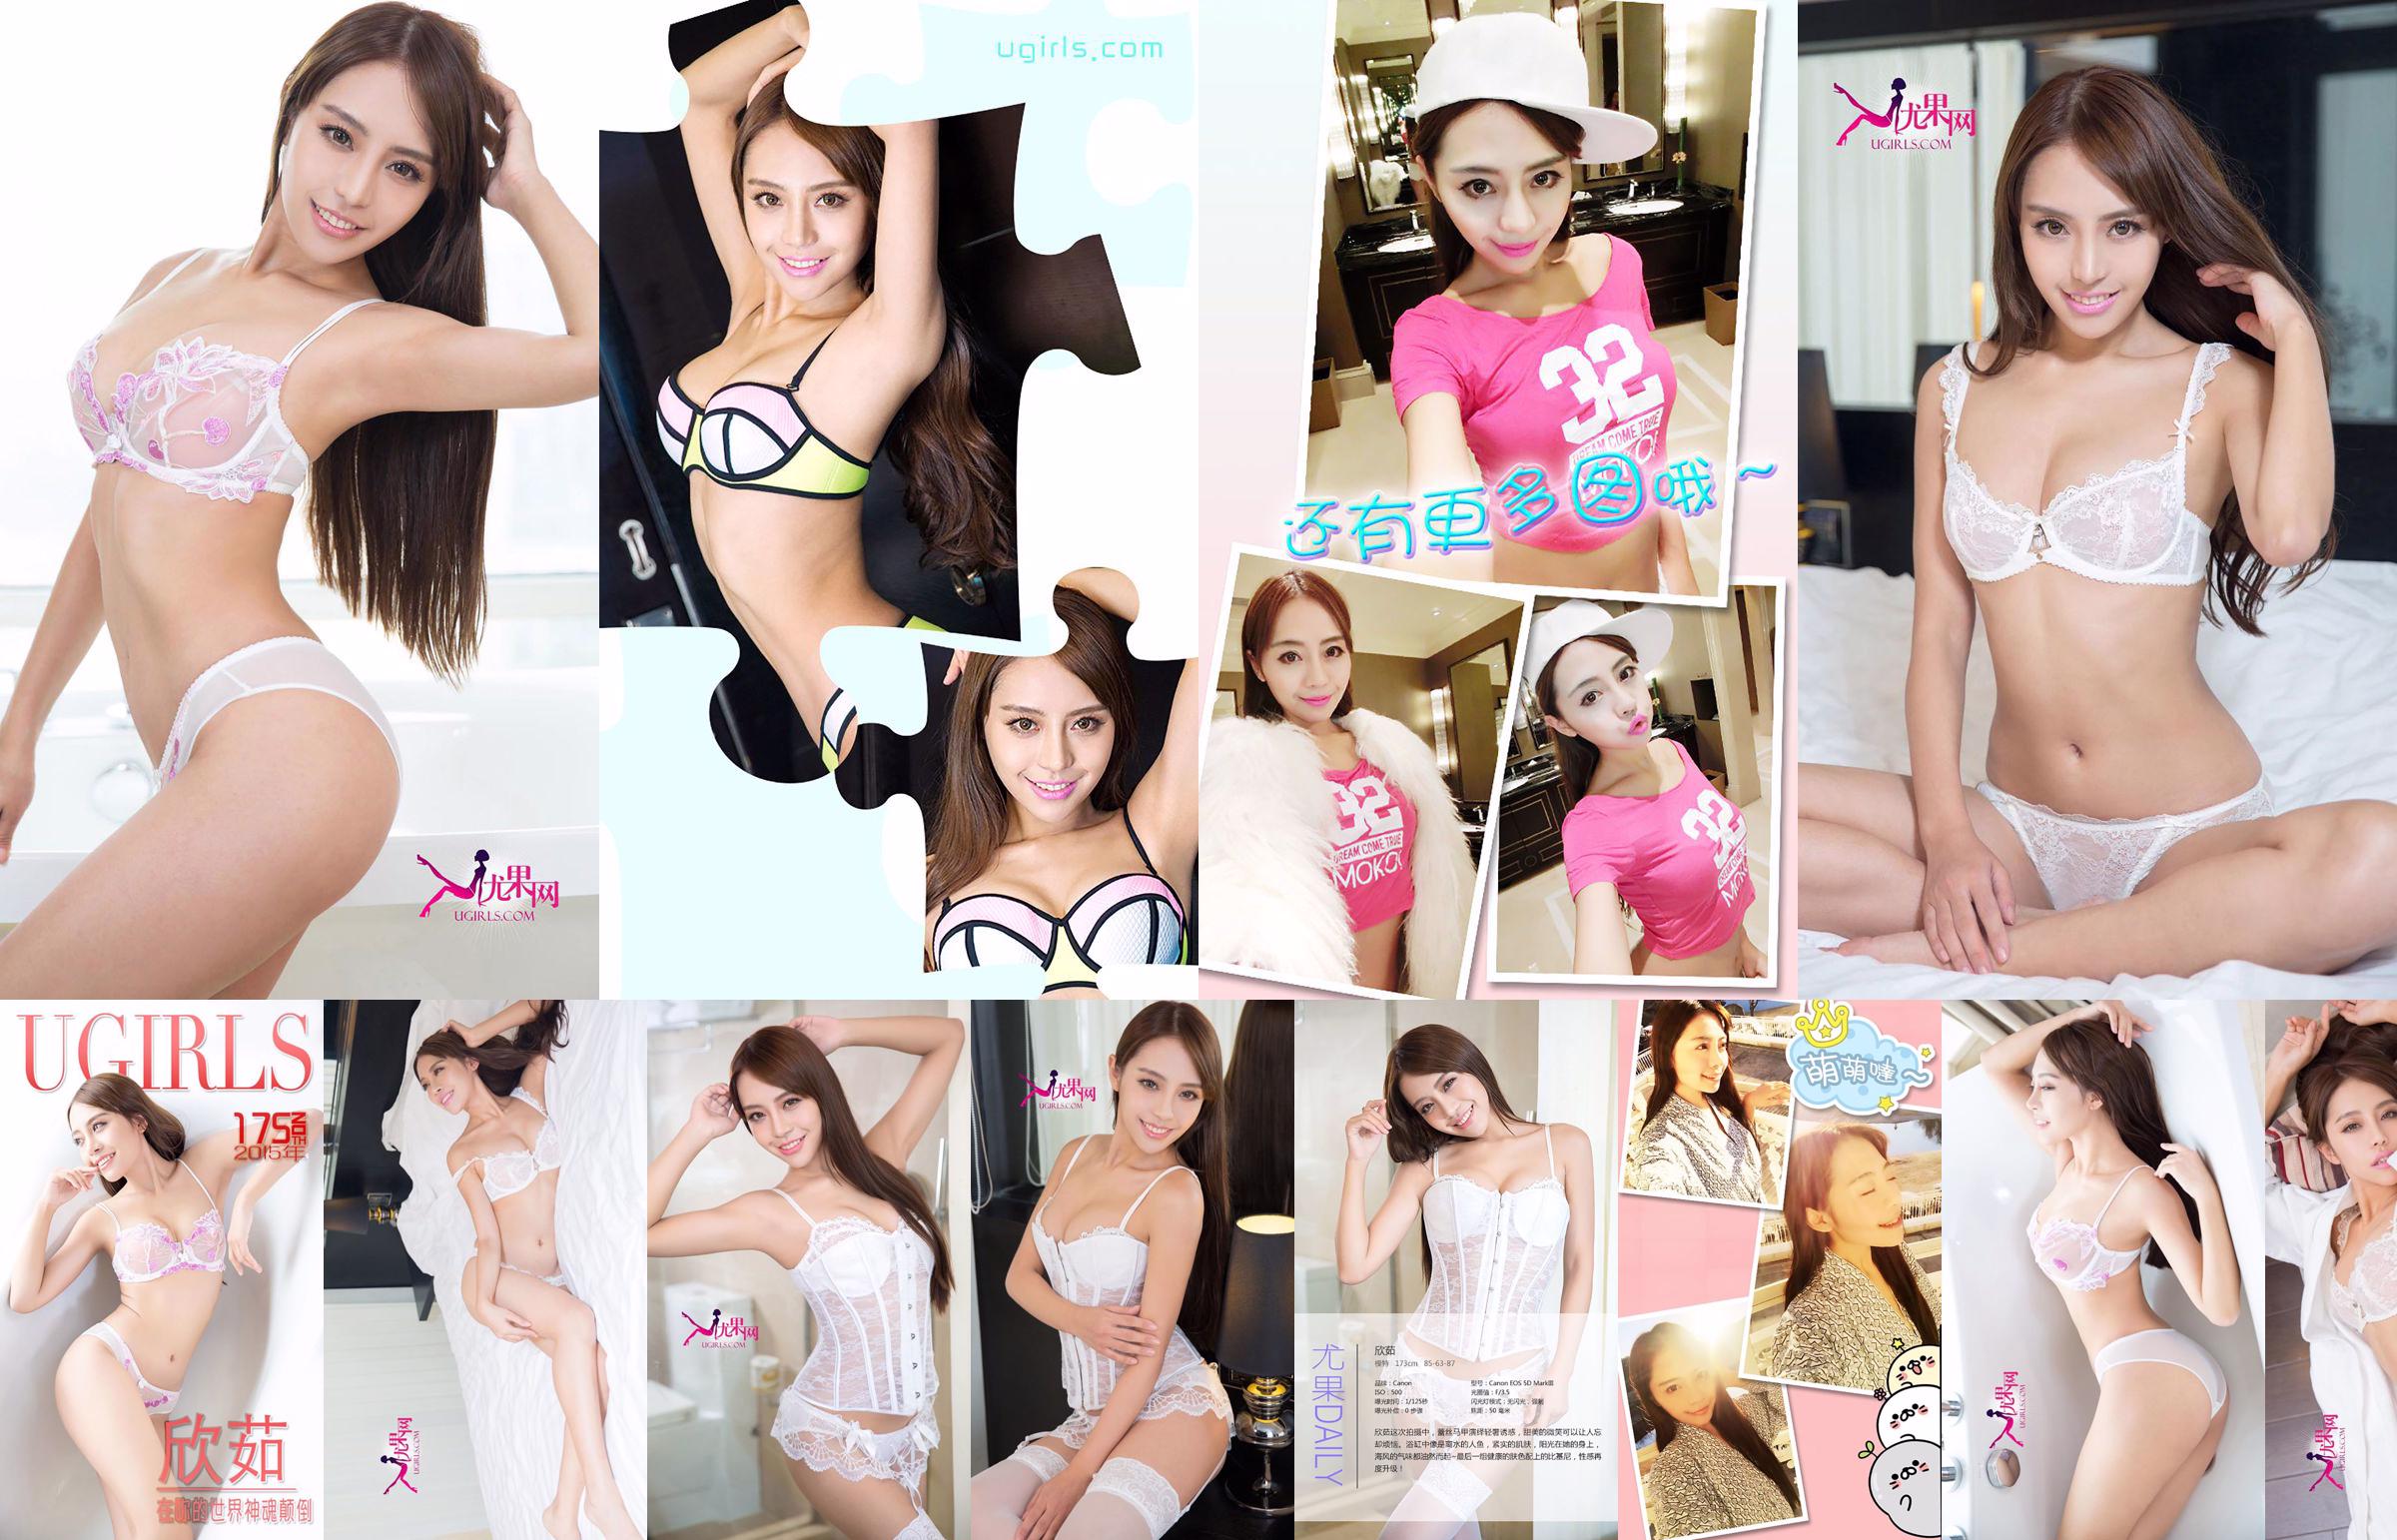 Xinru "In Your World Overheaded" [爱 优 物 Ugirls] N ° 175 No.206fab Page 14